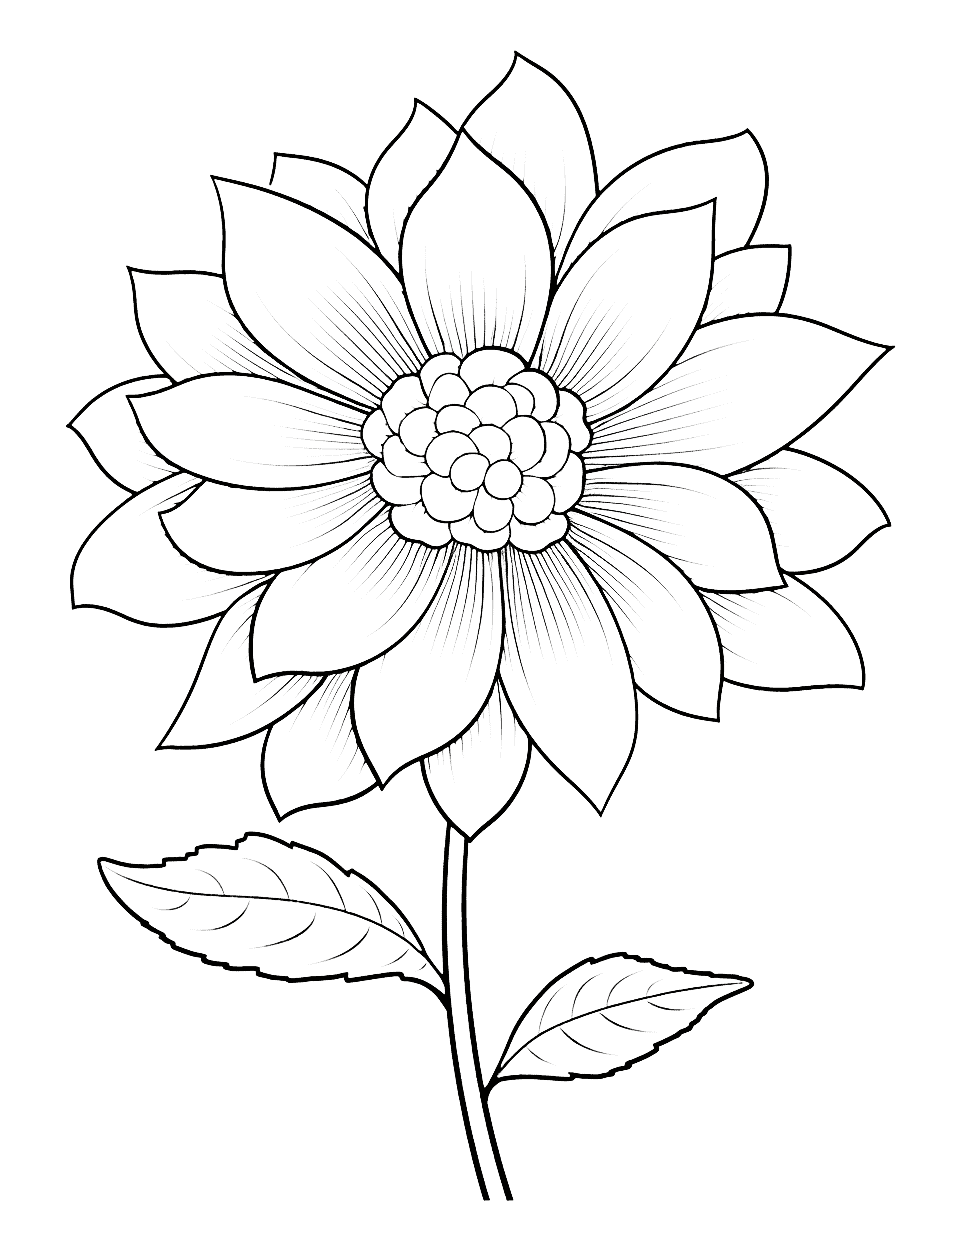 beautiful flower drawing isolated | Stock vector | Colourbox-saigonsouth.com.vn